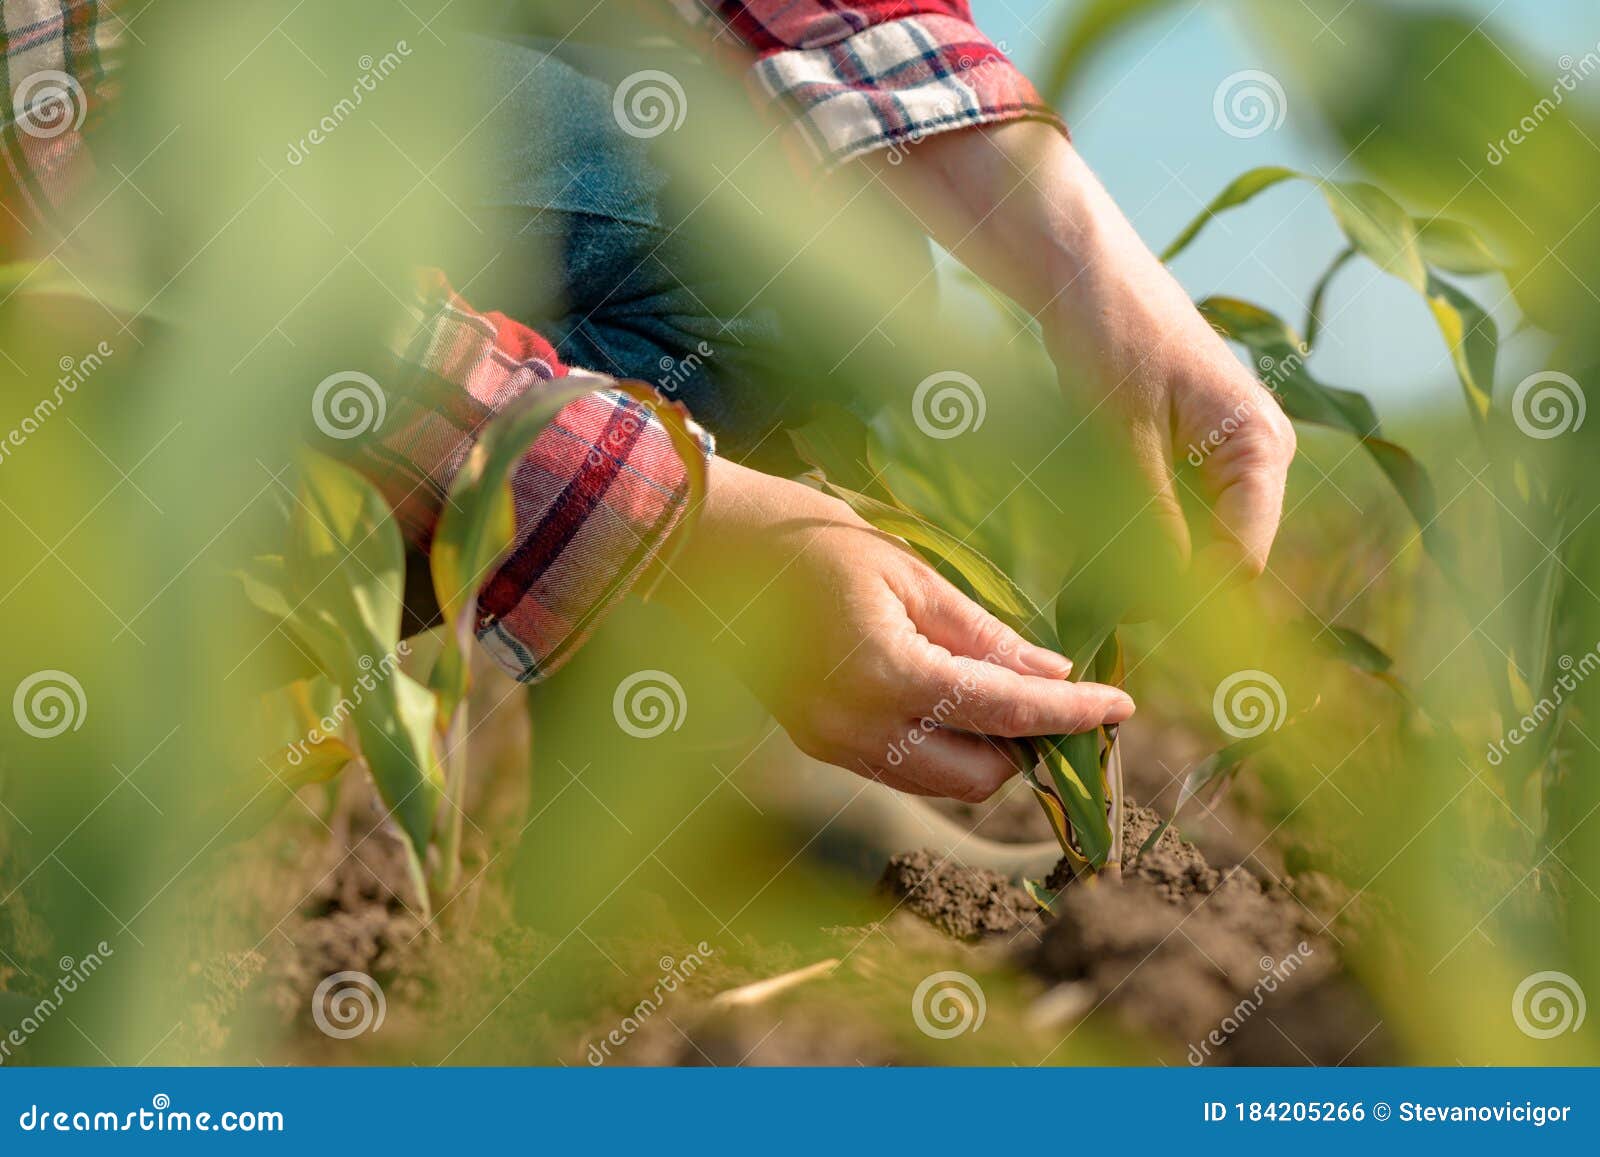 female agronomist examining young green corn crops in field